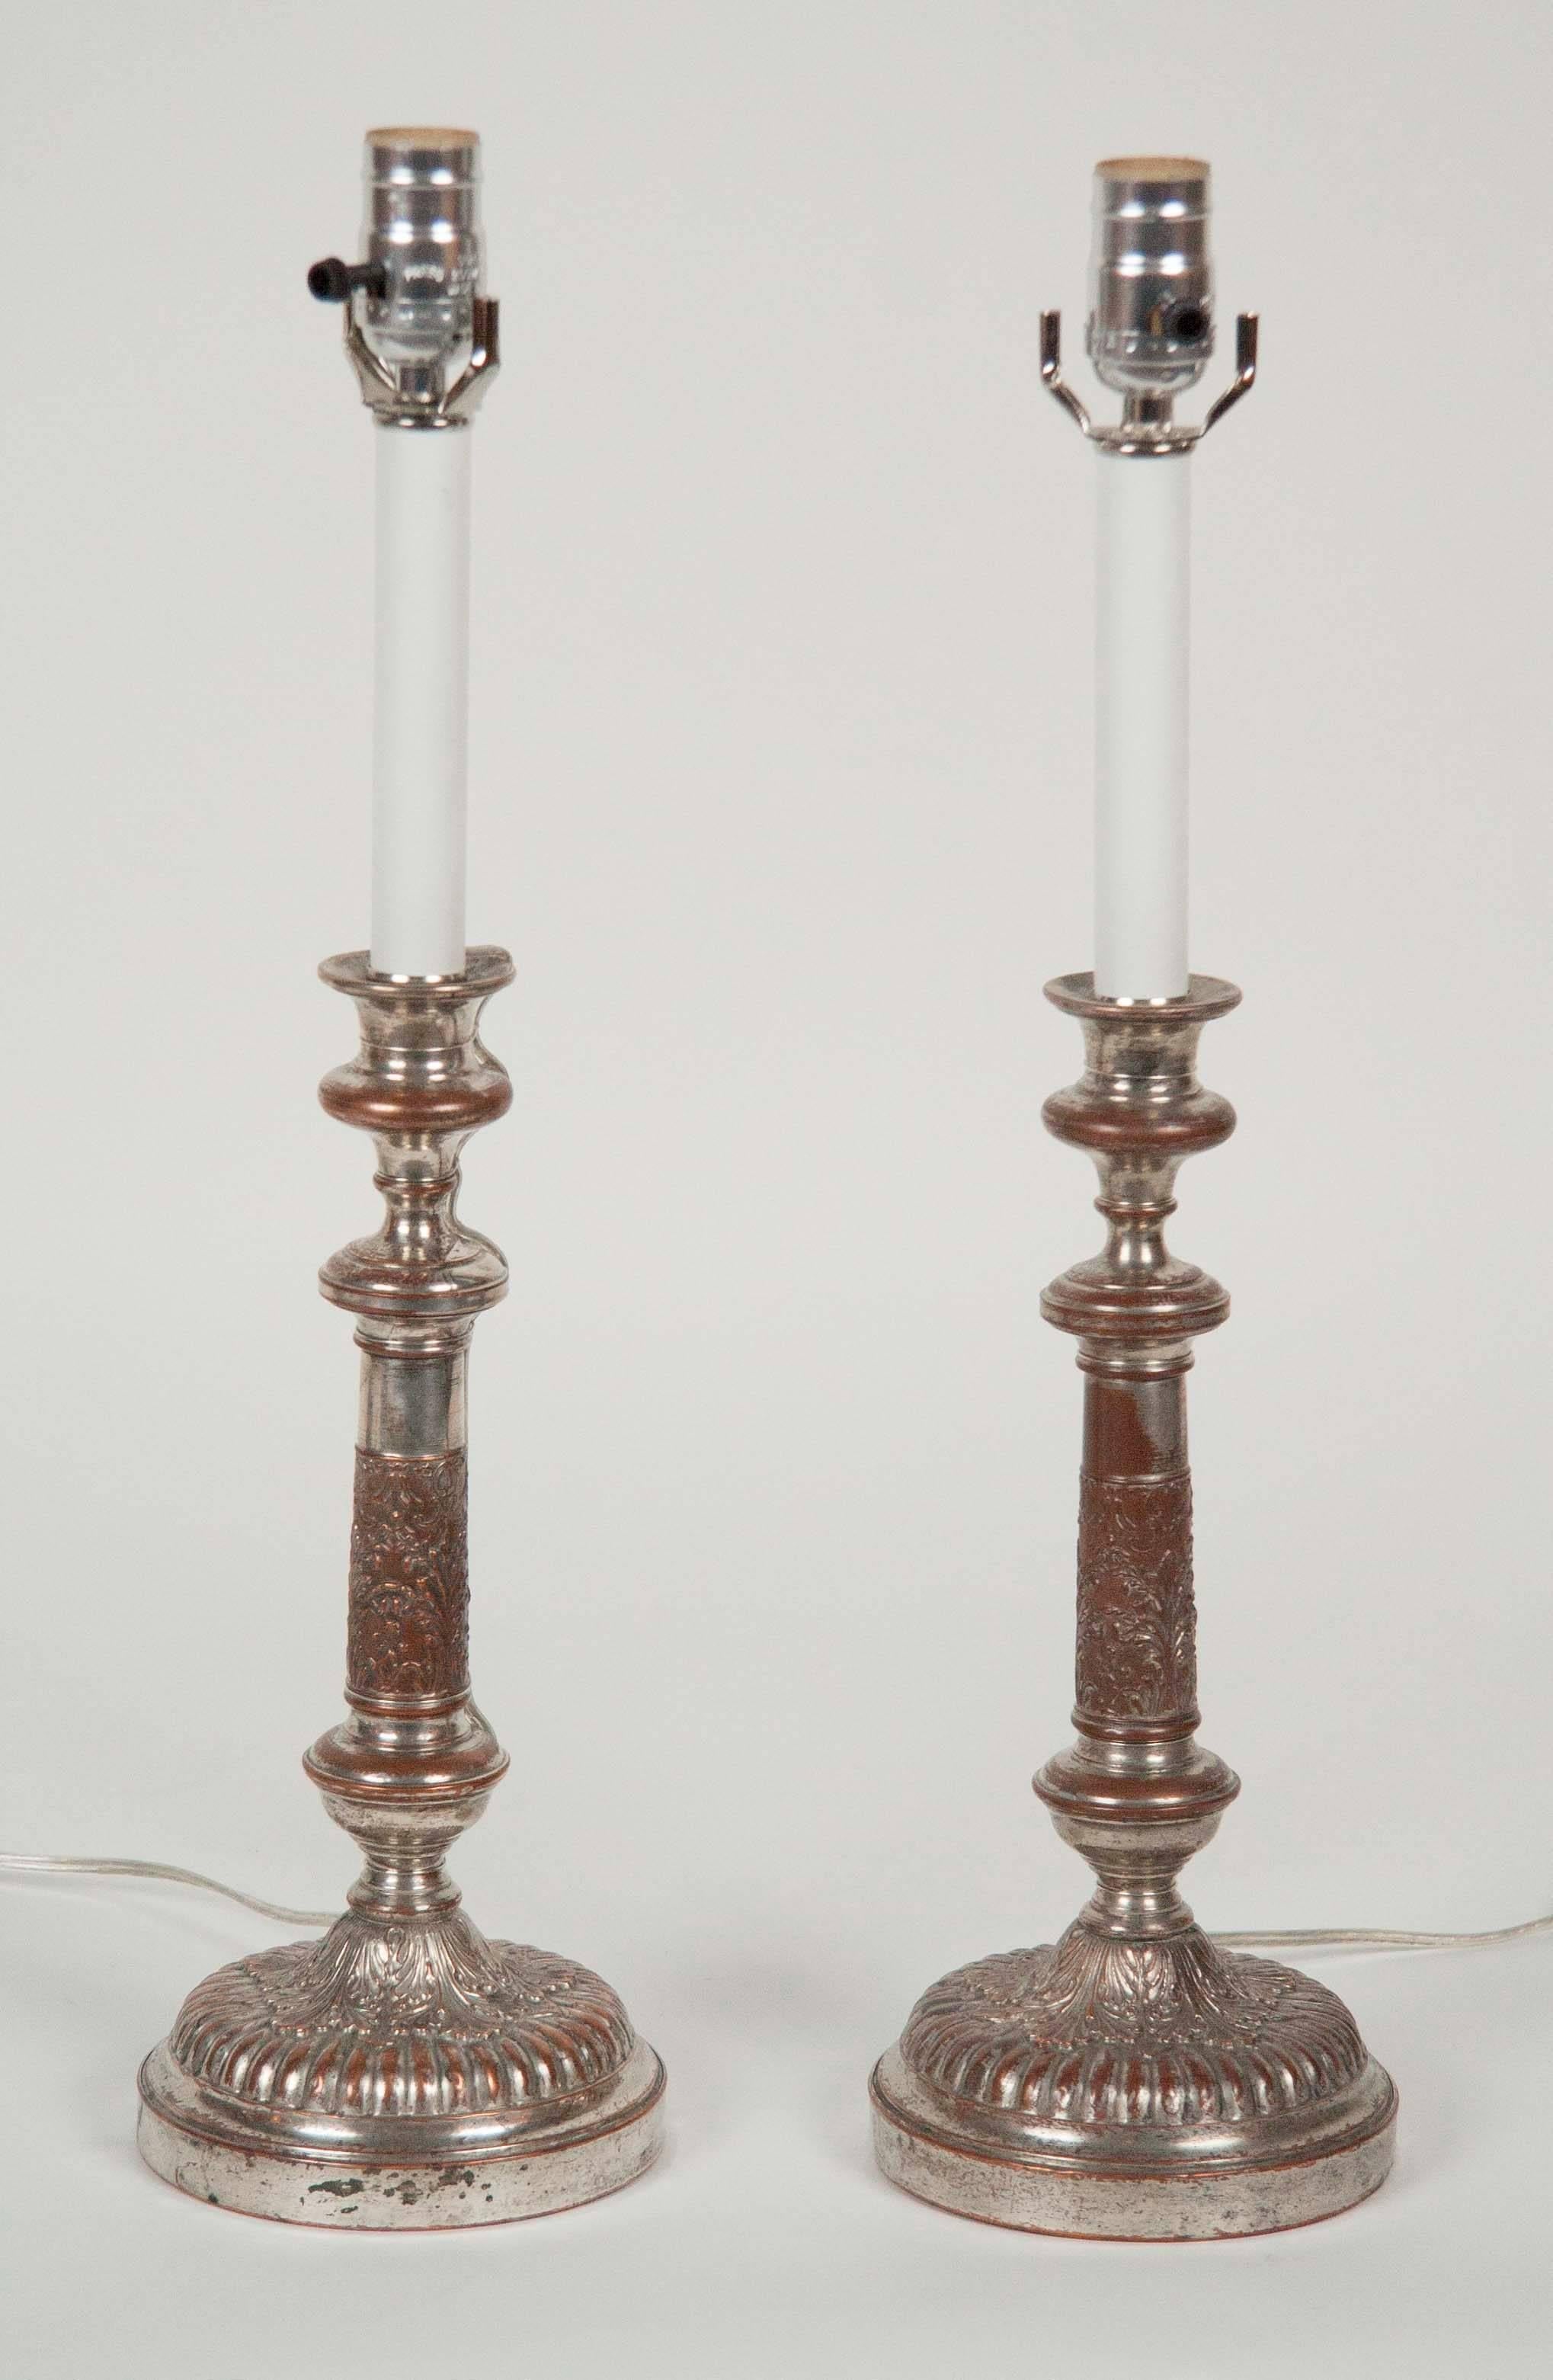 A pair of silver on copper candlesticks having a decorated gadrooned base. Now electrified as lamps.